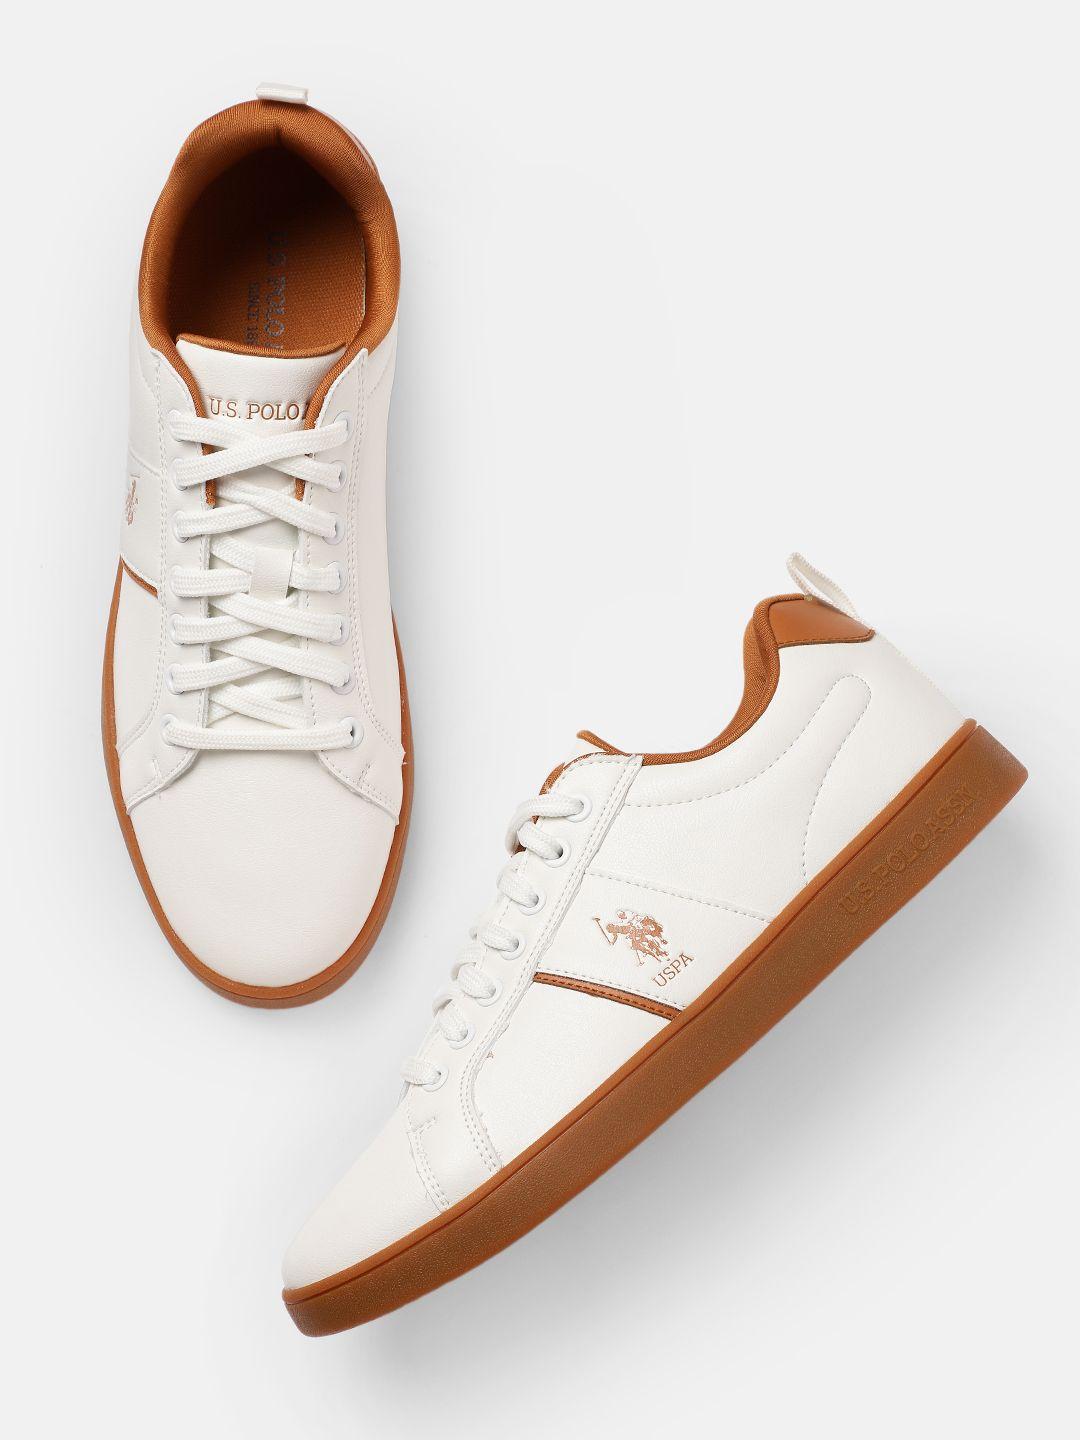 u.s. polo assn. men off white solid sneakers